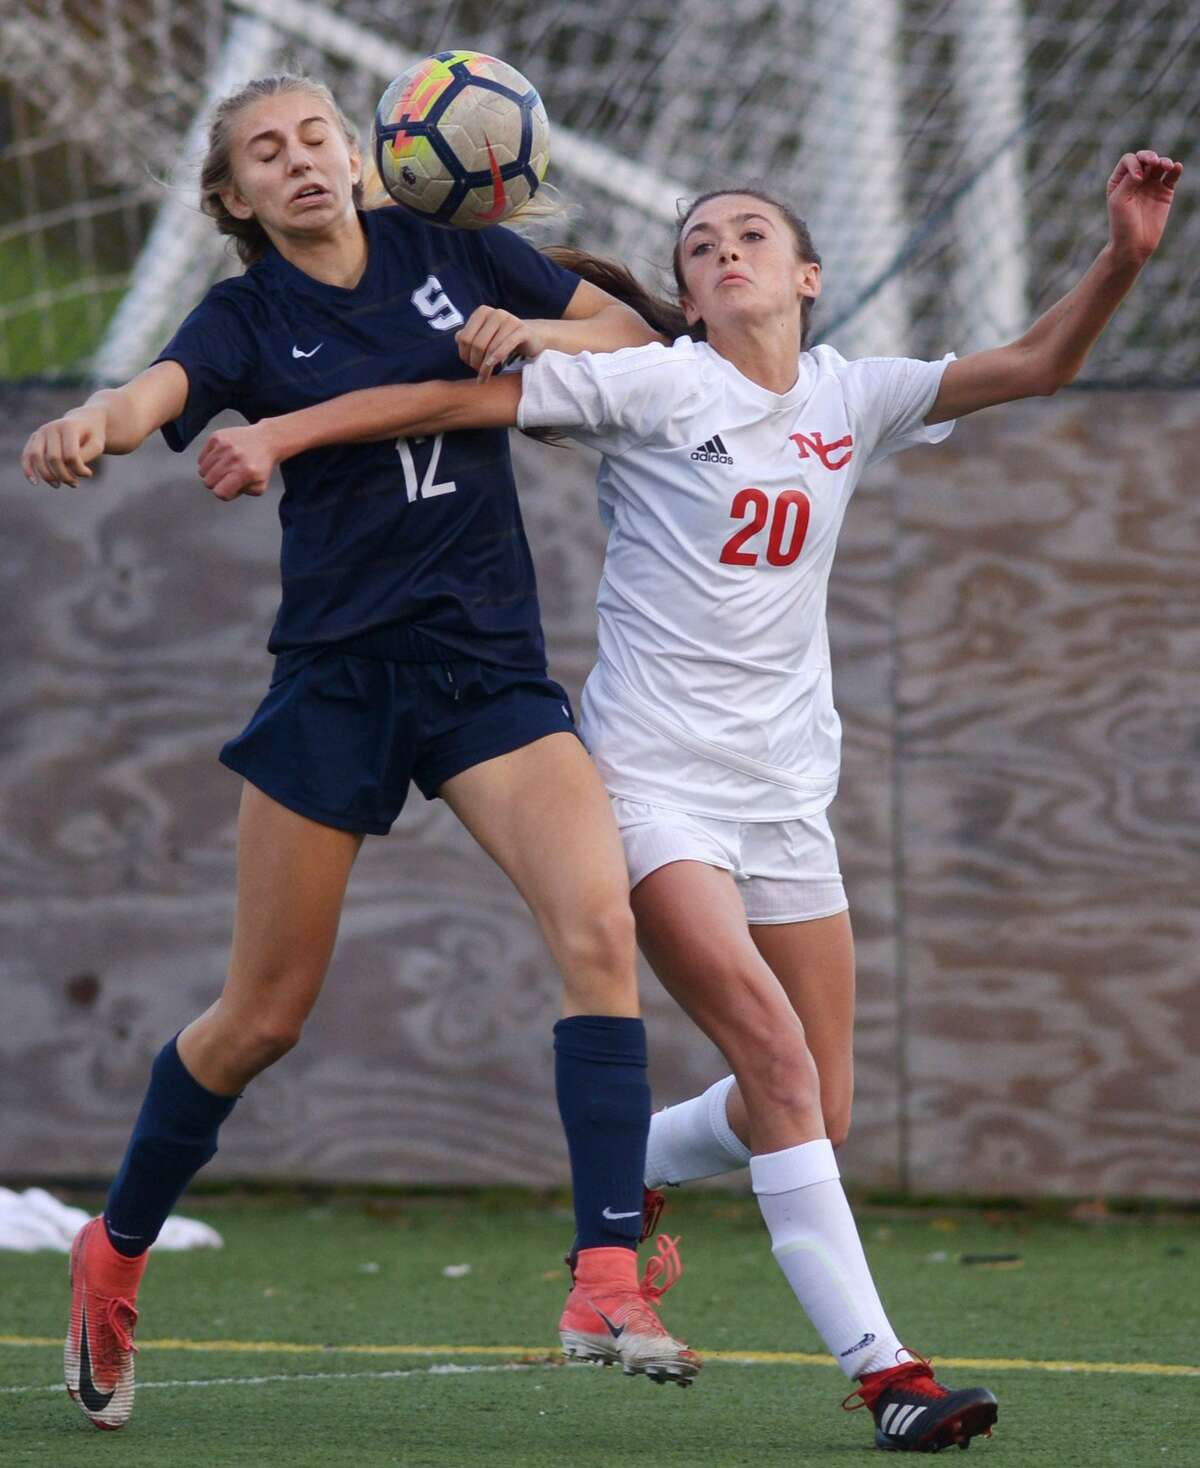 Wrecker #12 Cailyn Lesher and Ram #20 Emma Schuh battle for the ball as the Staples High School Wreckers take on the New Canaan High School Rams in their Class LL girls soccer game Wednesday, November 7, 2018, at Wakeman Fields in Westport, Conn.